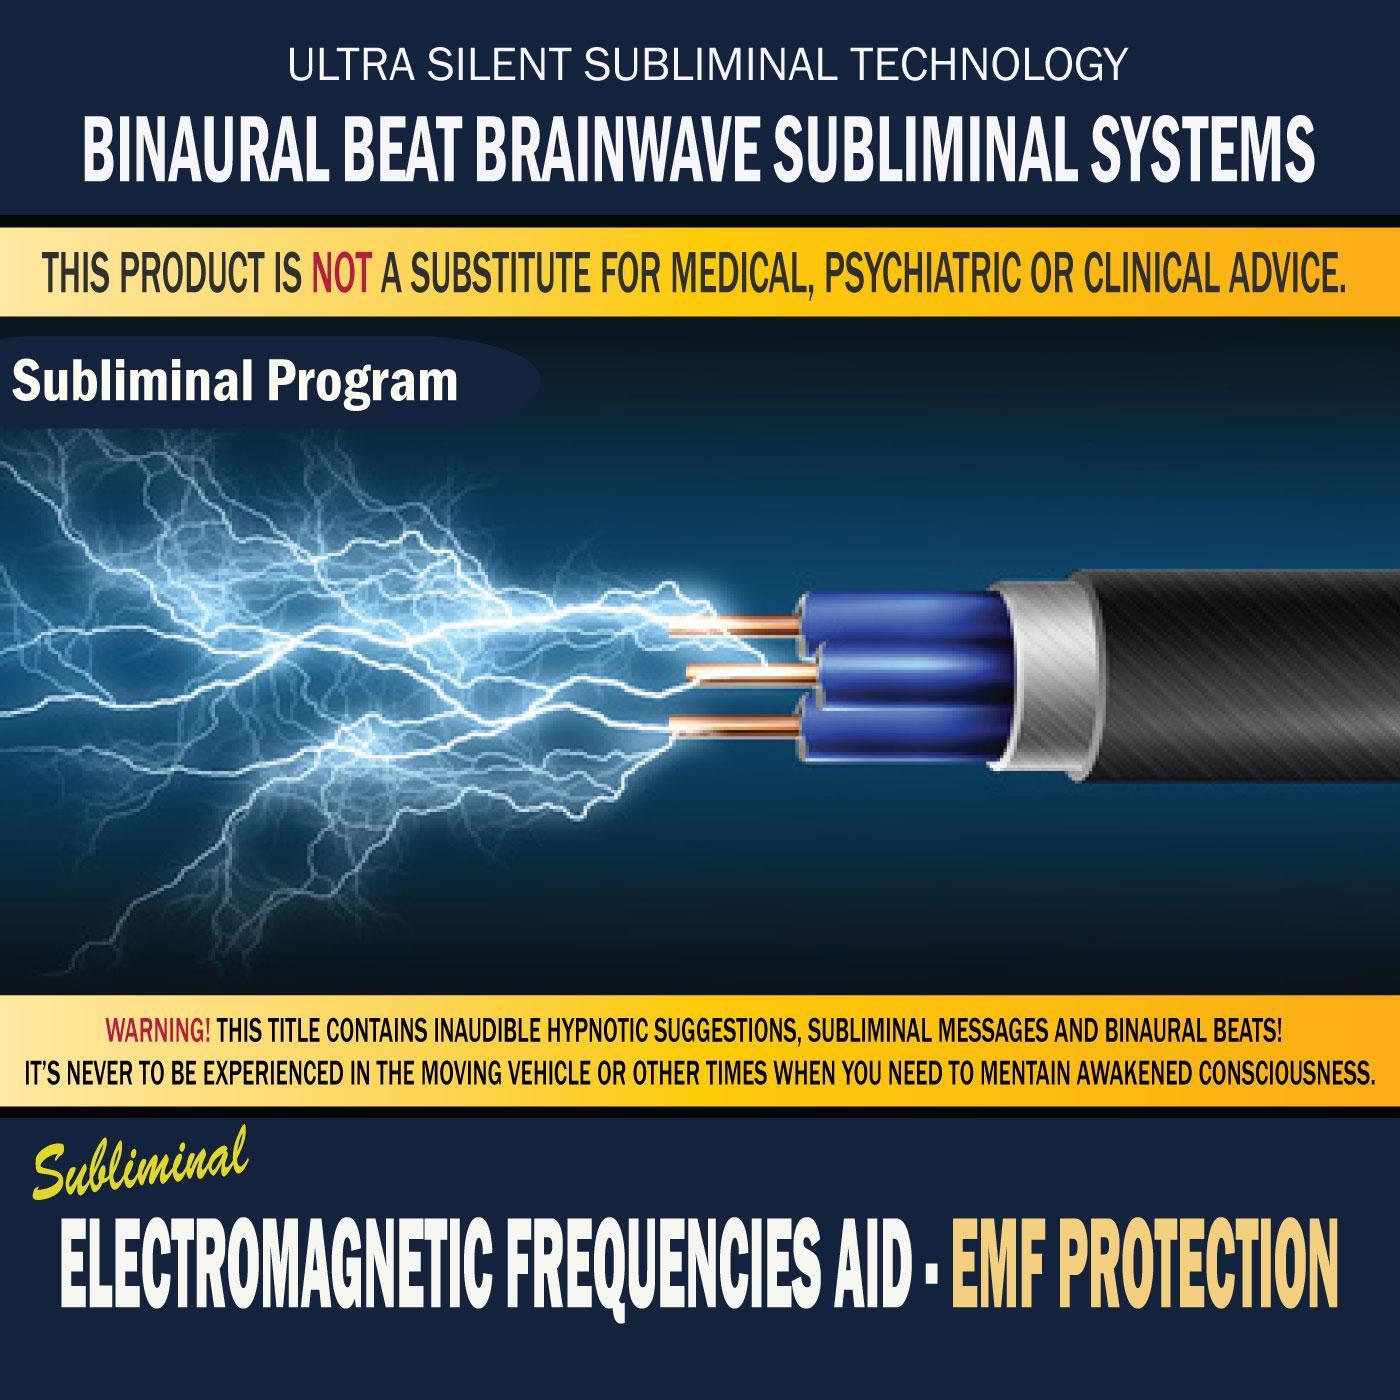 Electromagnetic Frequencies Aid: Emf Protection